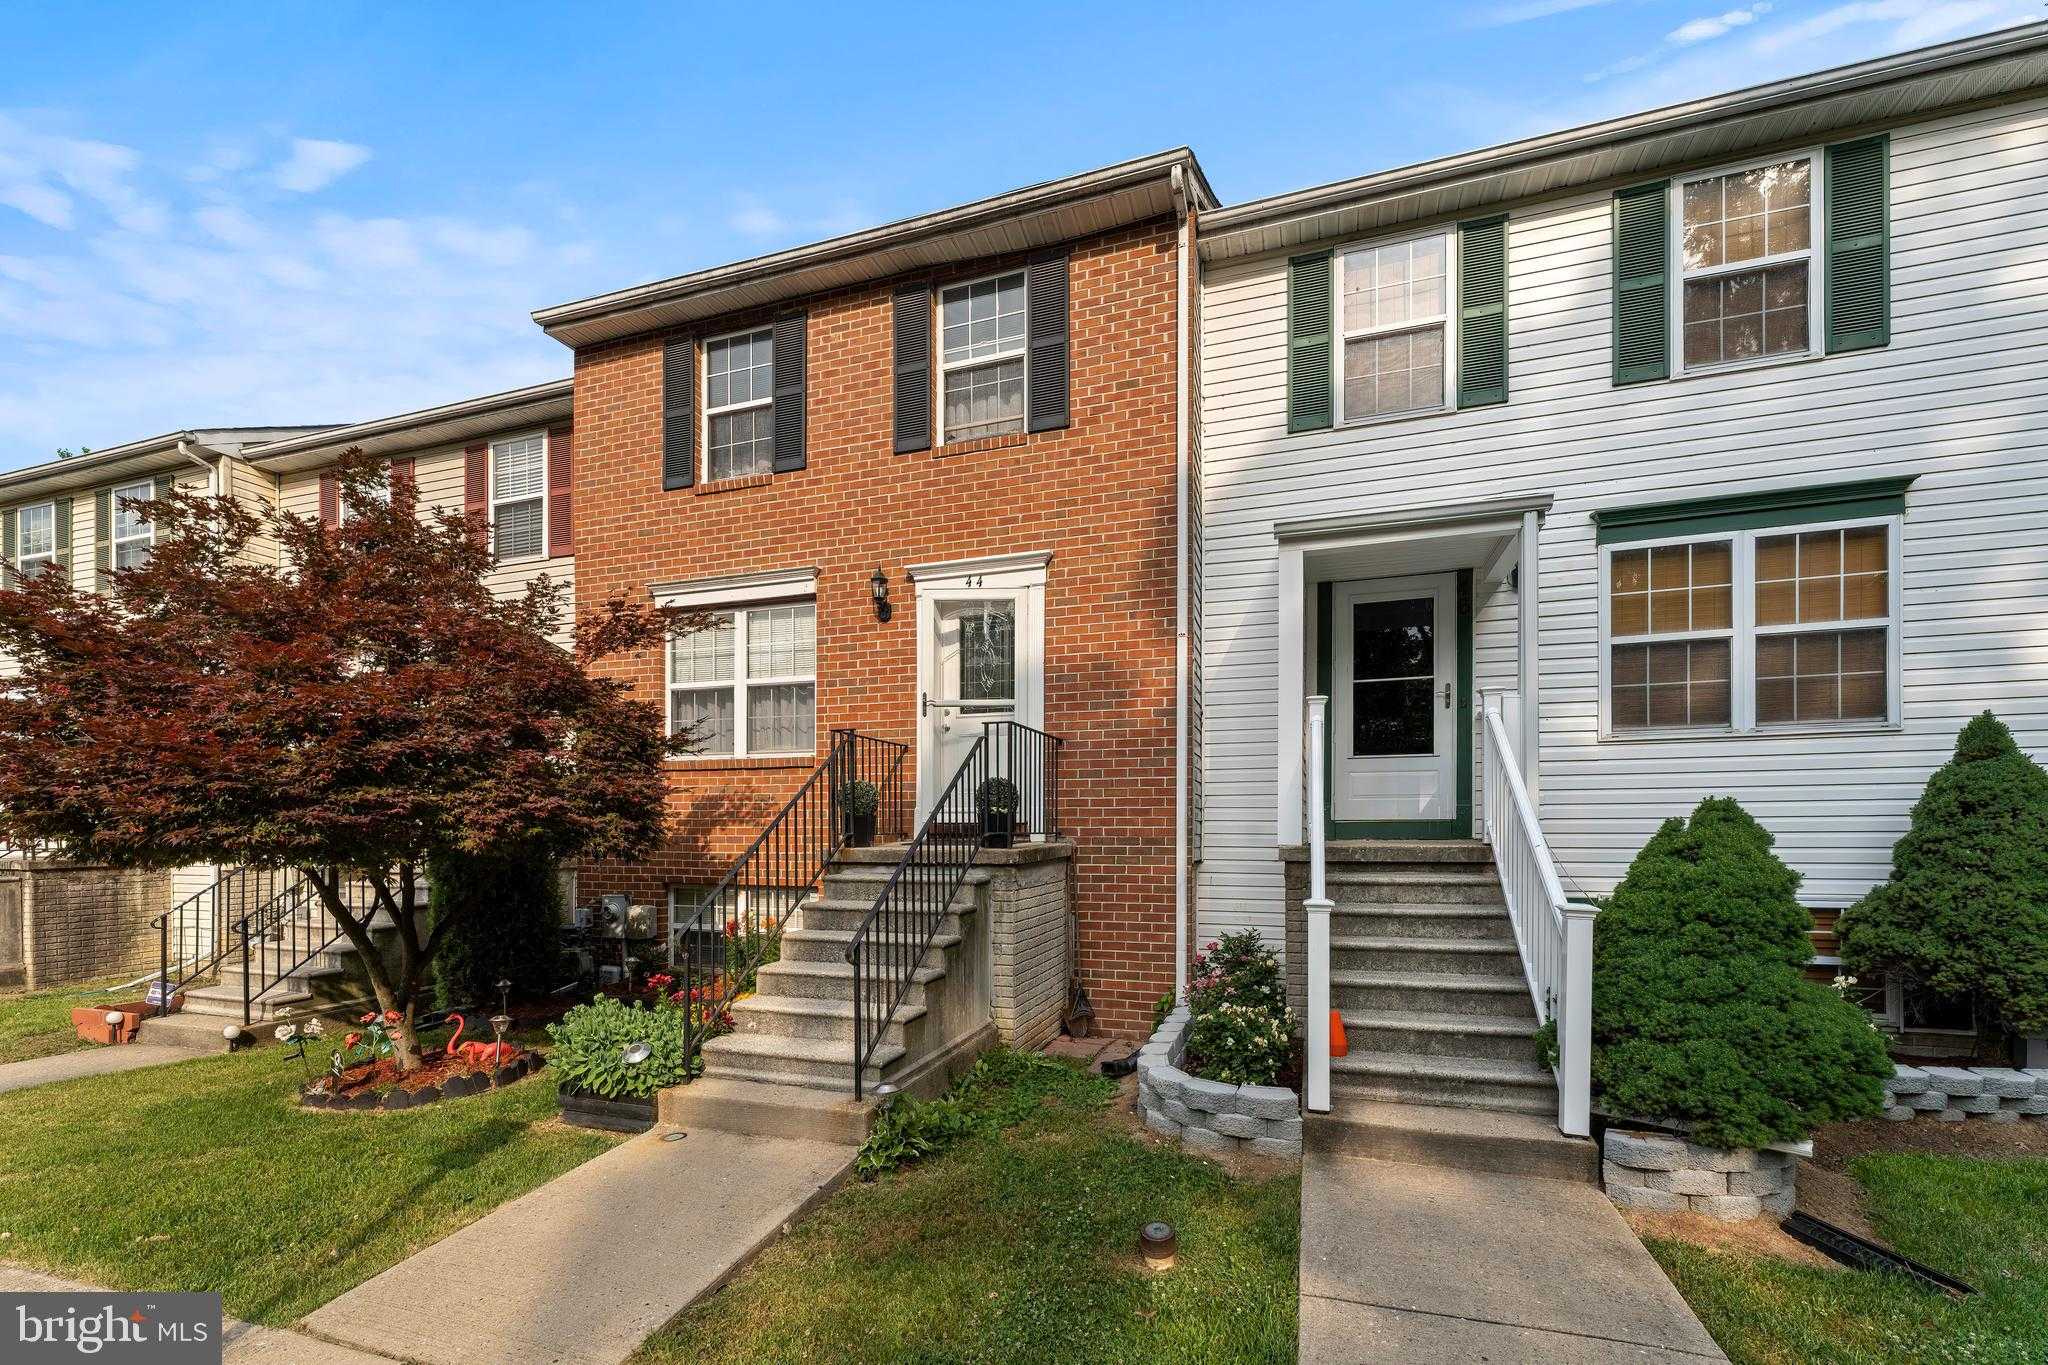 View ROSEDALE, MD 21237 townhome